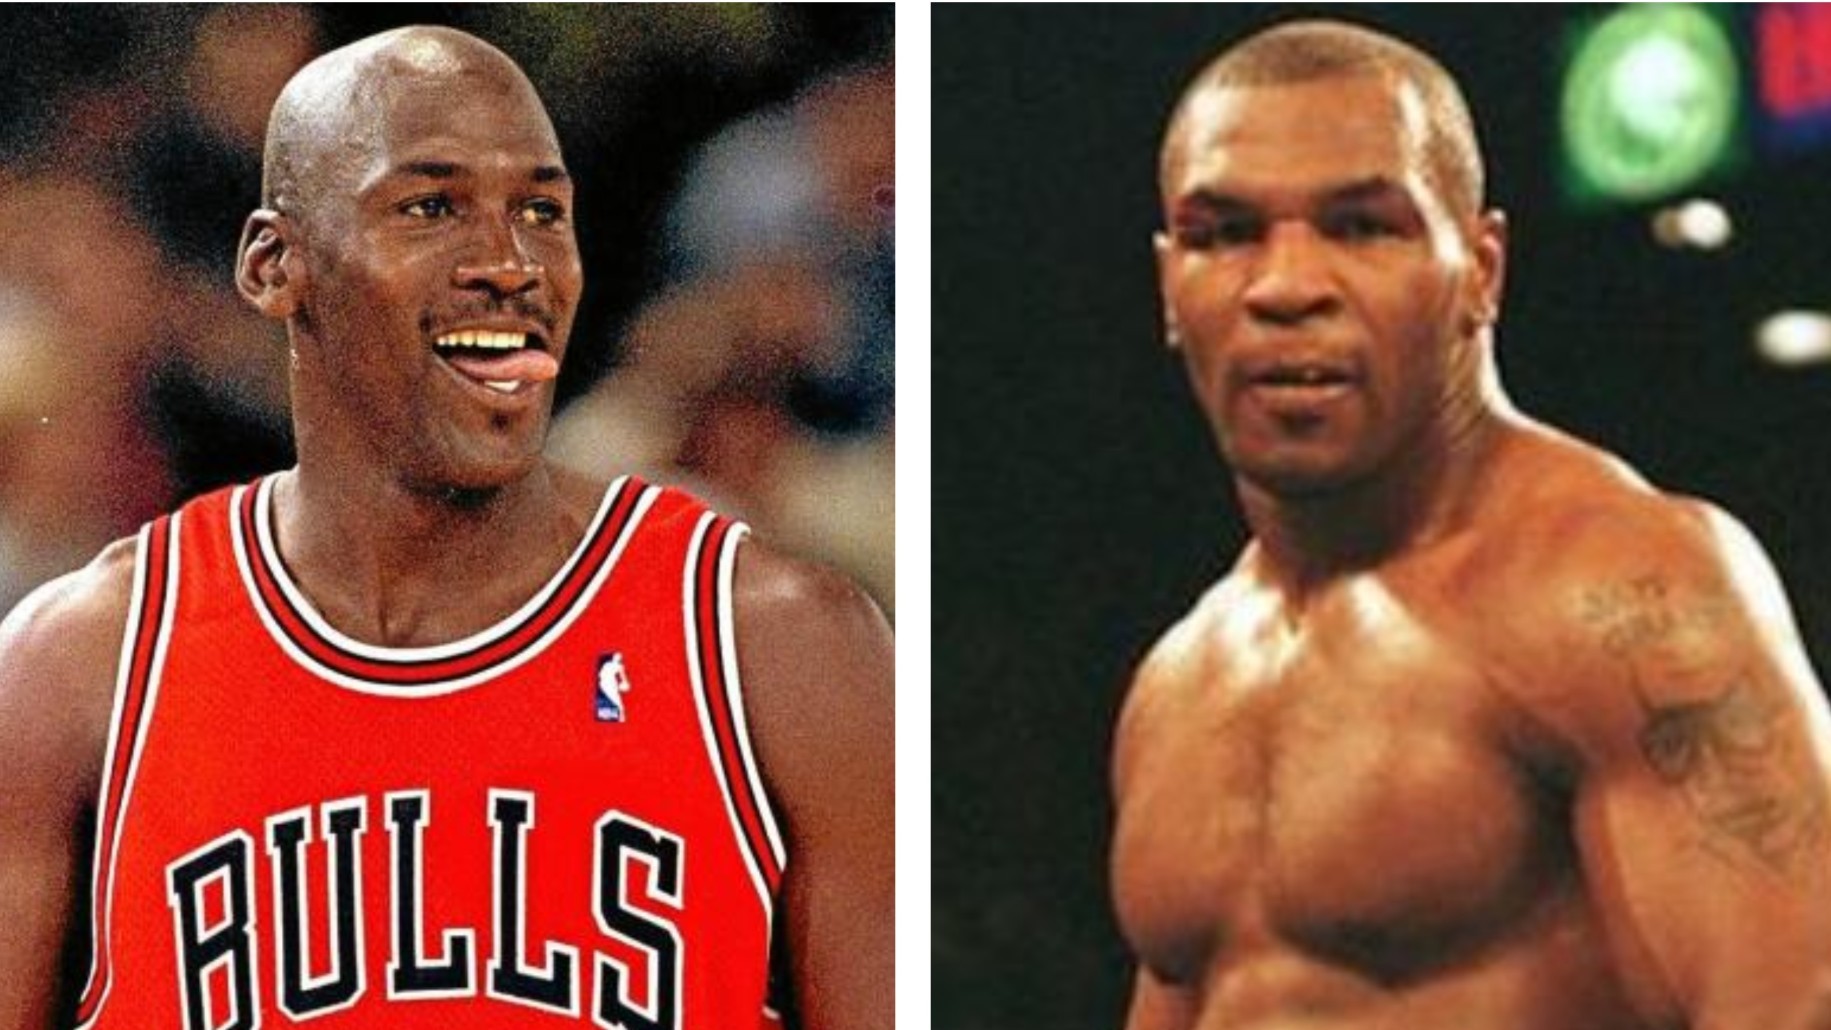 The day Mike Tyson threatened to punch Michael Jordan over a girl